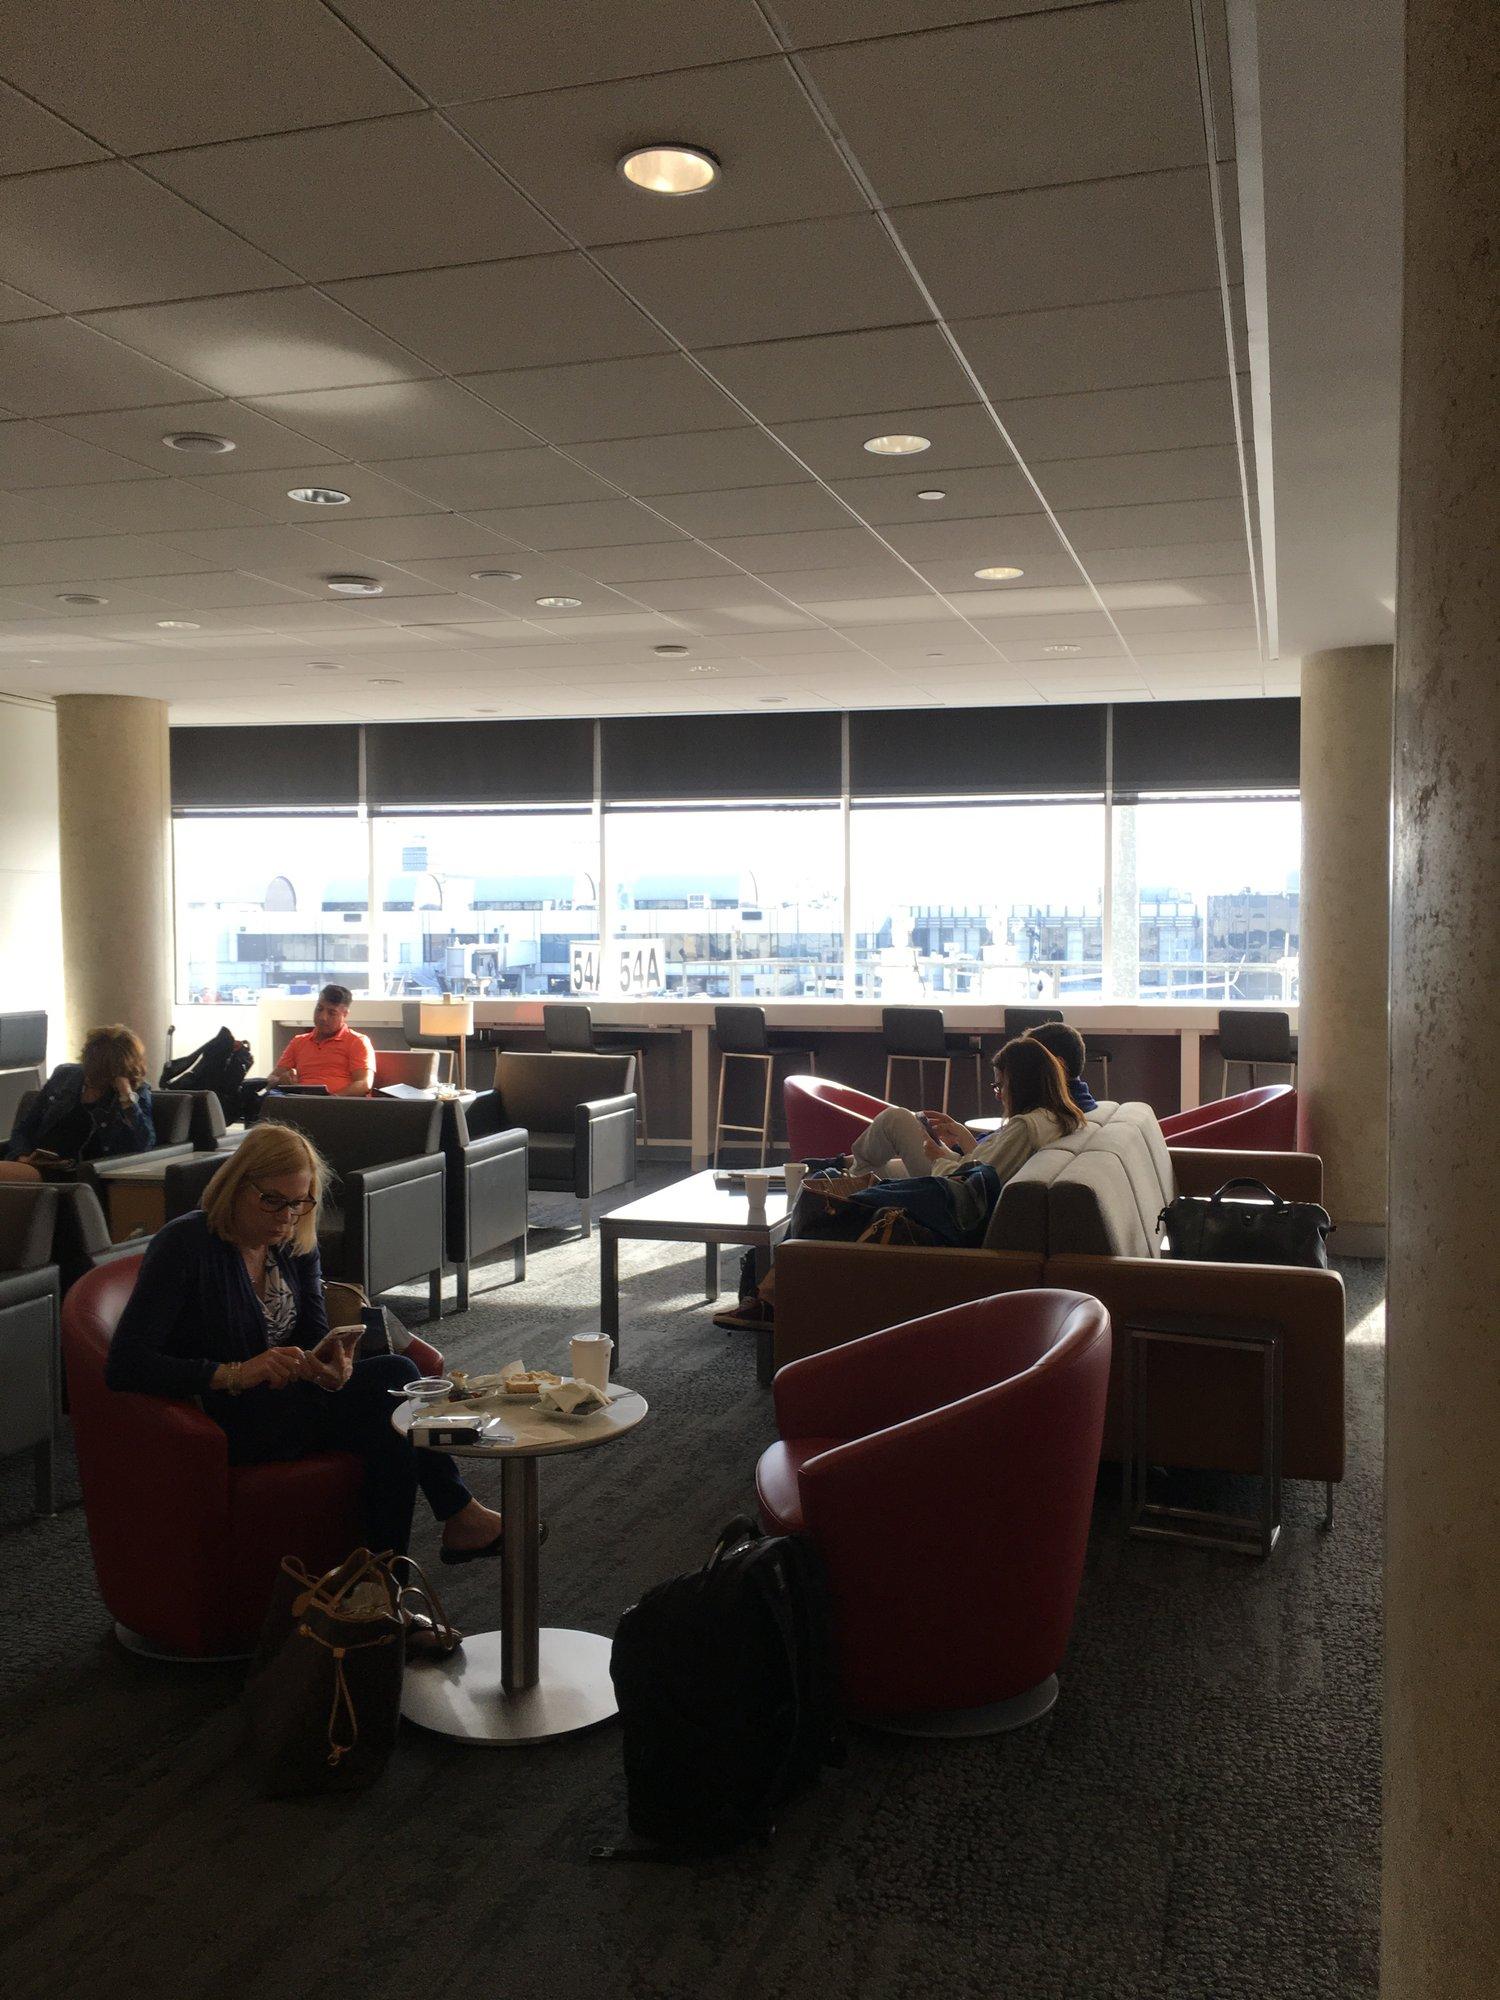 American Airlines Admirals Club image 17 of 38